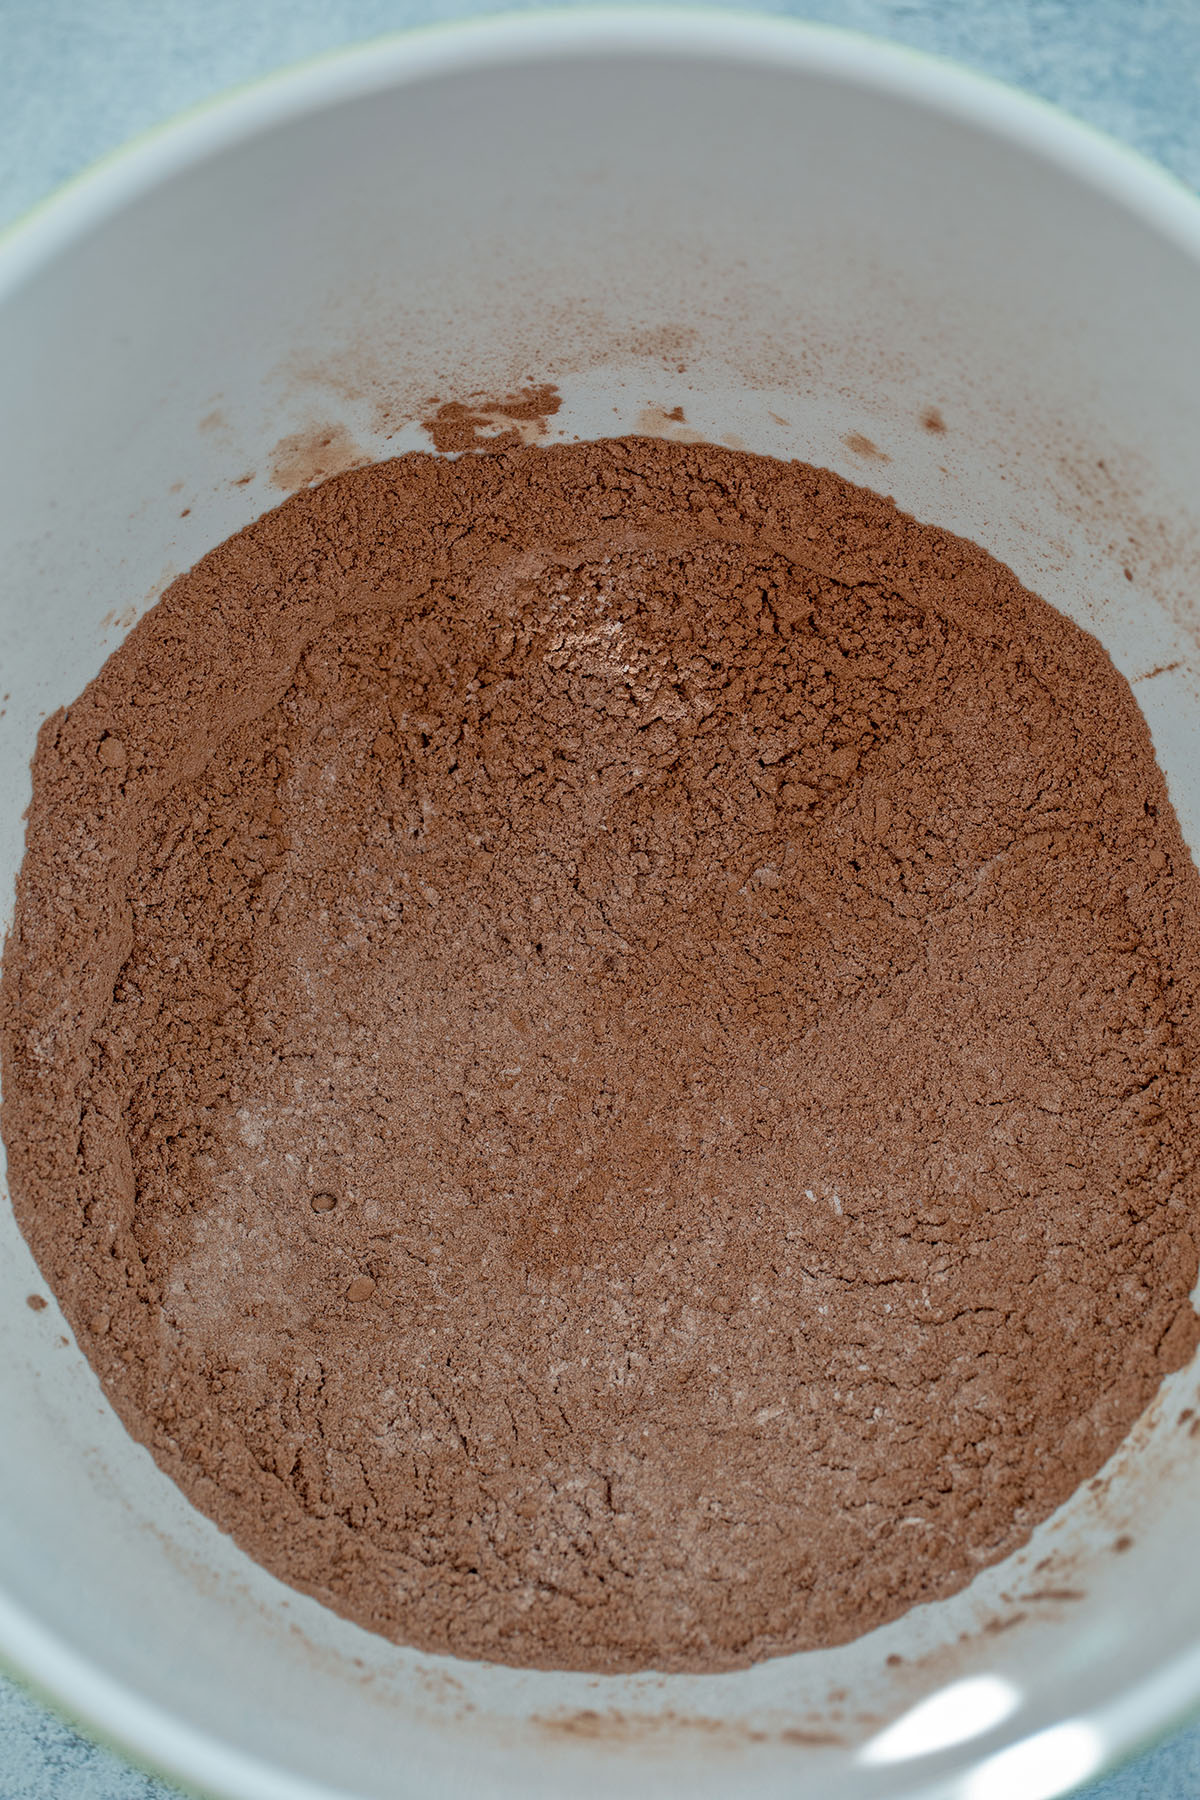 Flour, cocoa powder, and dry ingredients in mixing bowl.